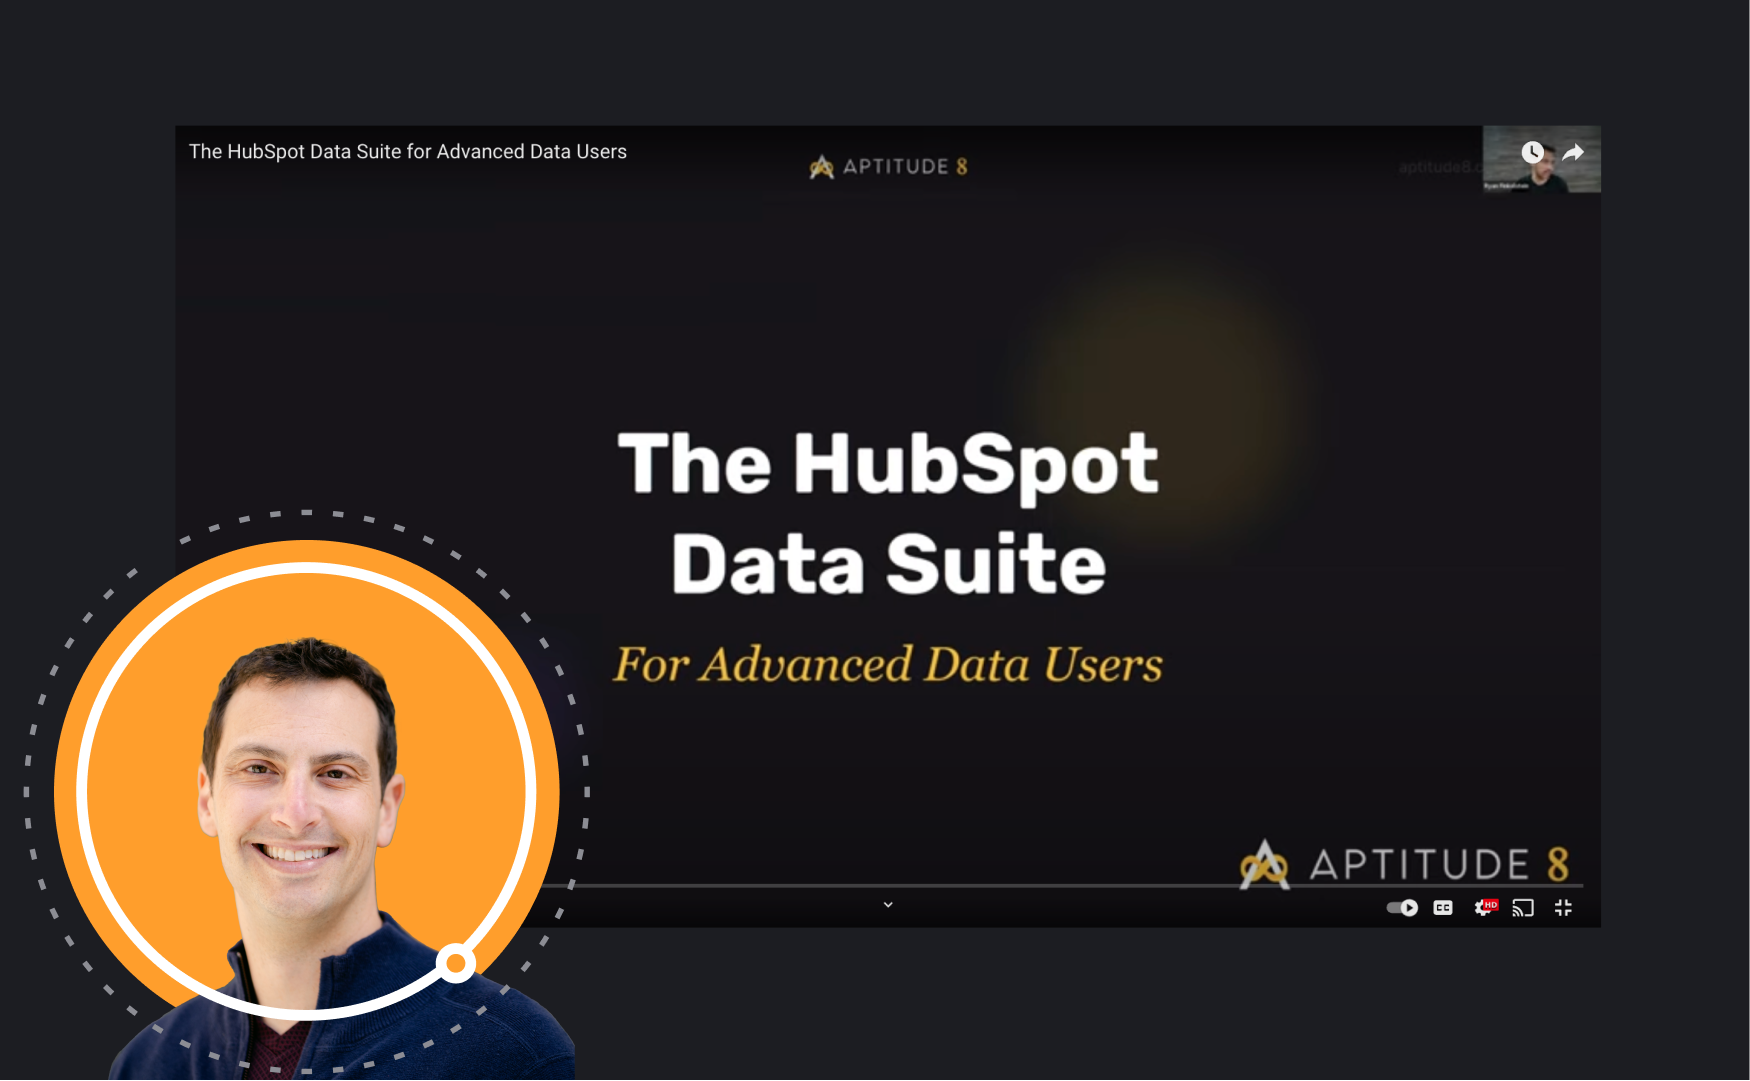 The HubSpot Data Suite for Advanced Data Users